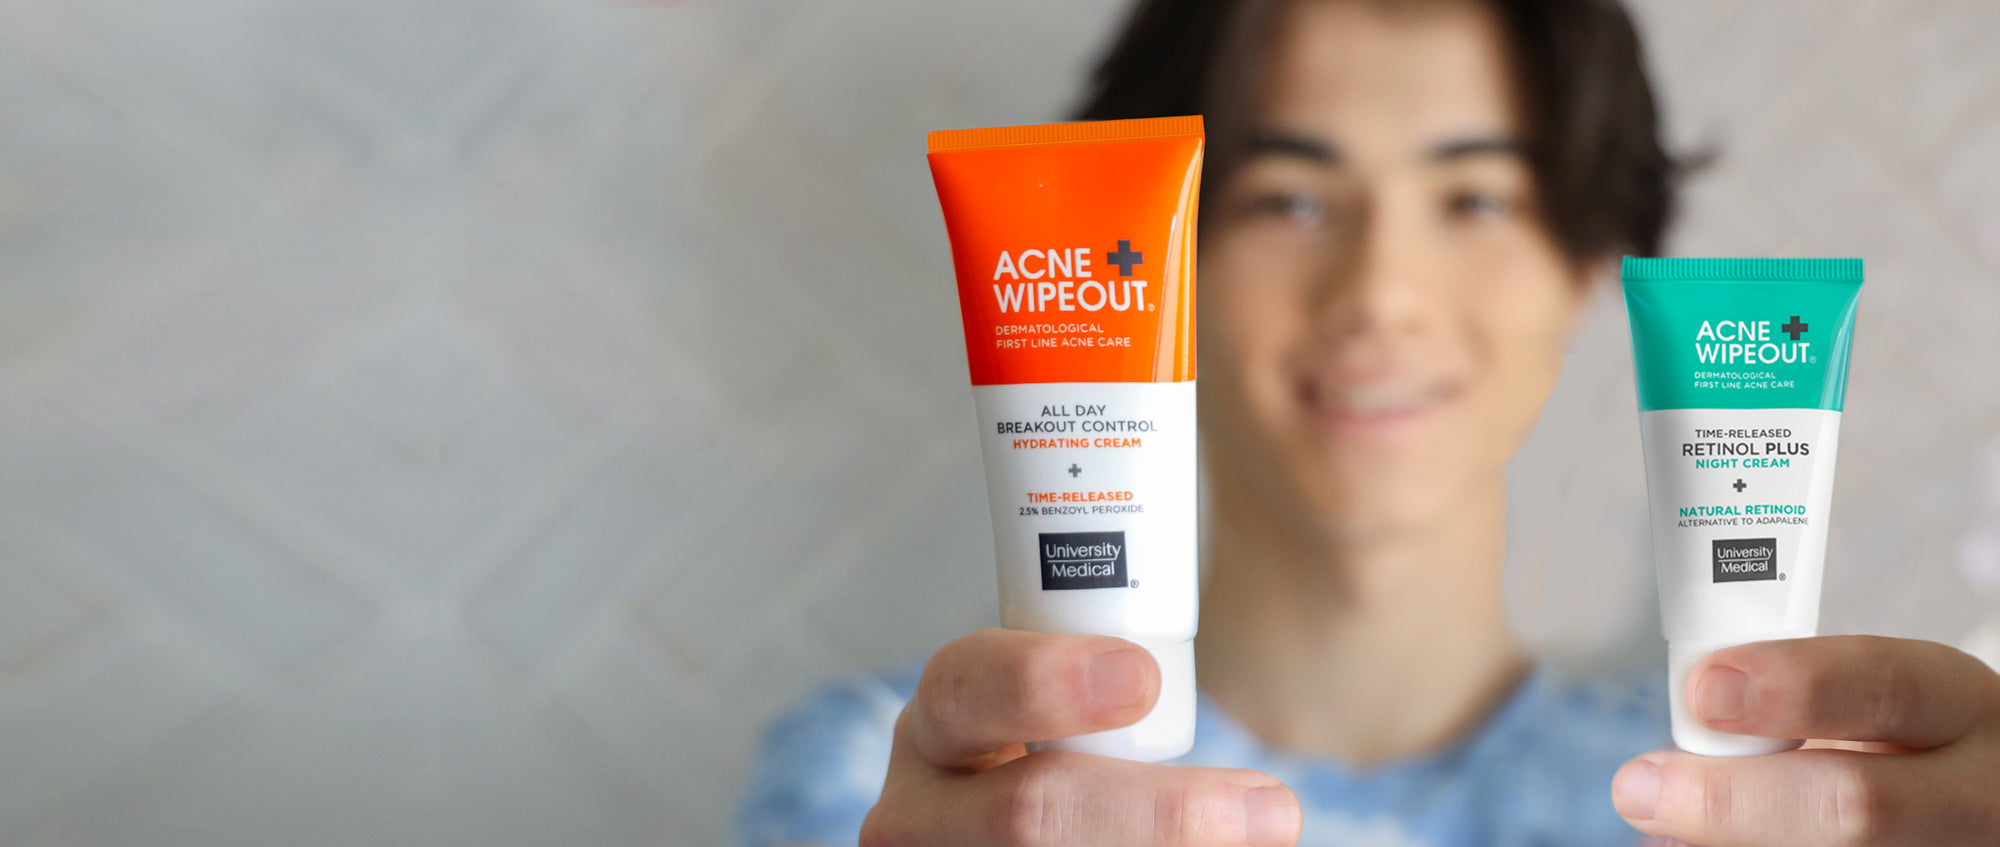 Acne Wipeout® Clinical Acne System